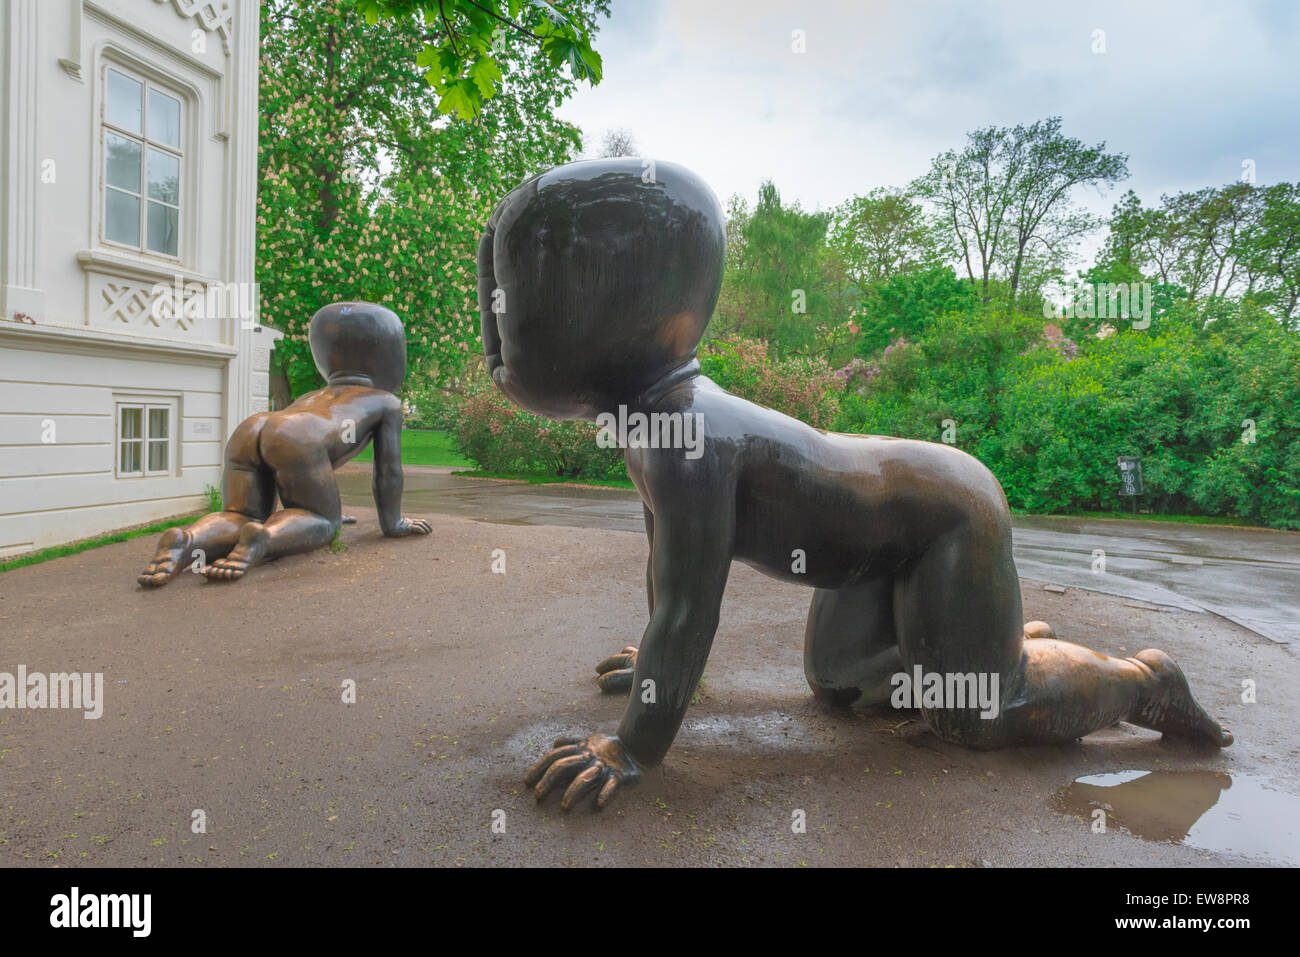 Cerny Prague, view of sculptures of sinister faceless children by David Cerny in the grounds of the Museum Kampa in Prague, Czech Republic. Stock Photo